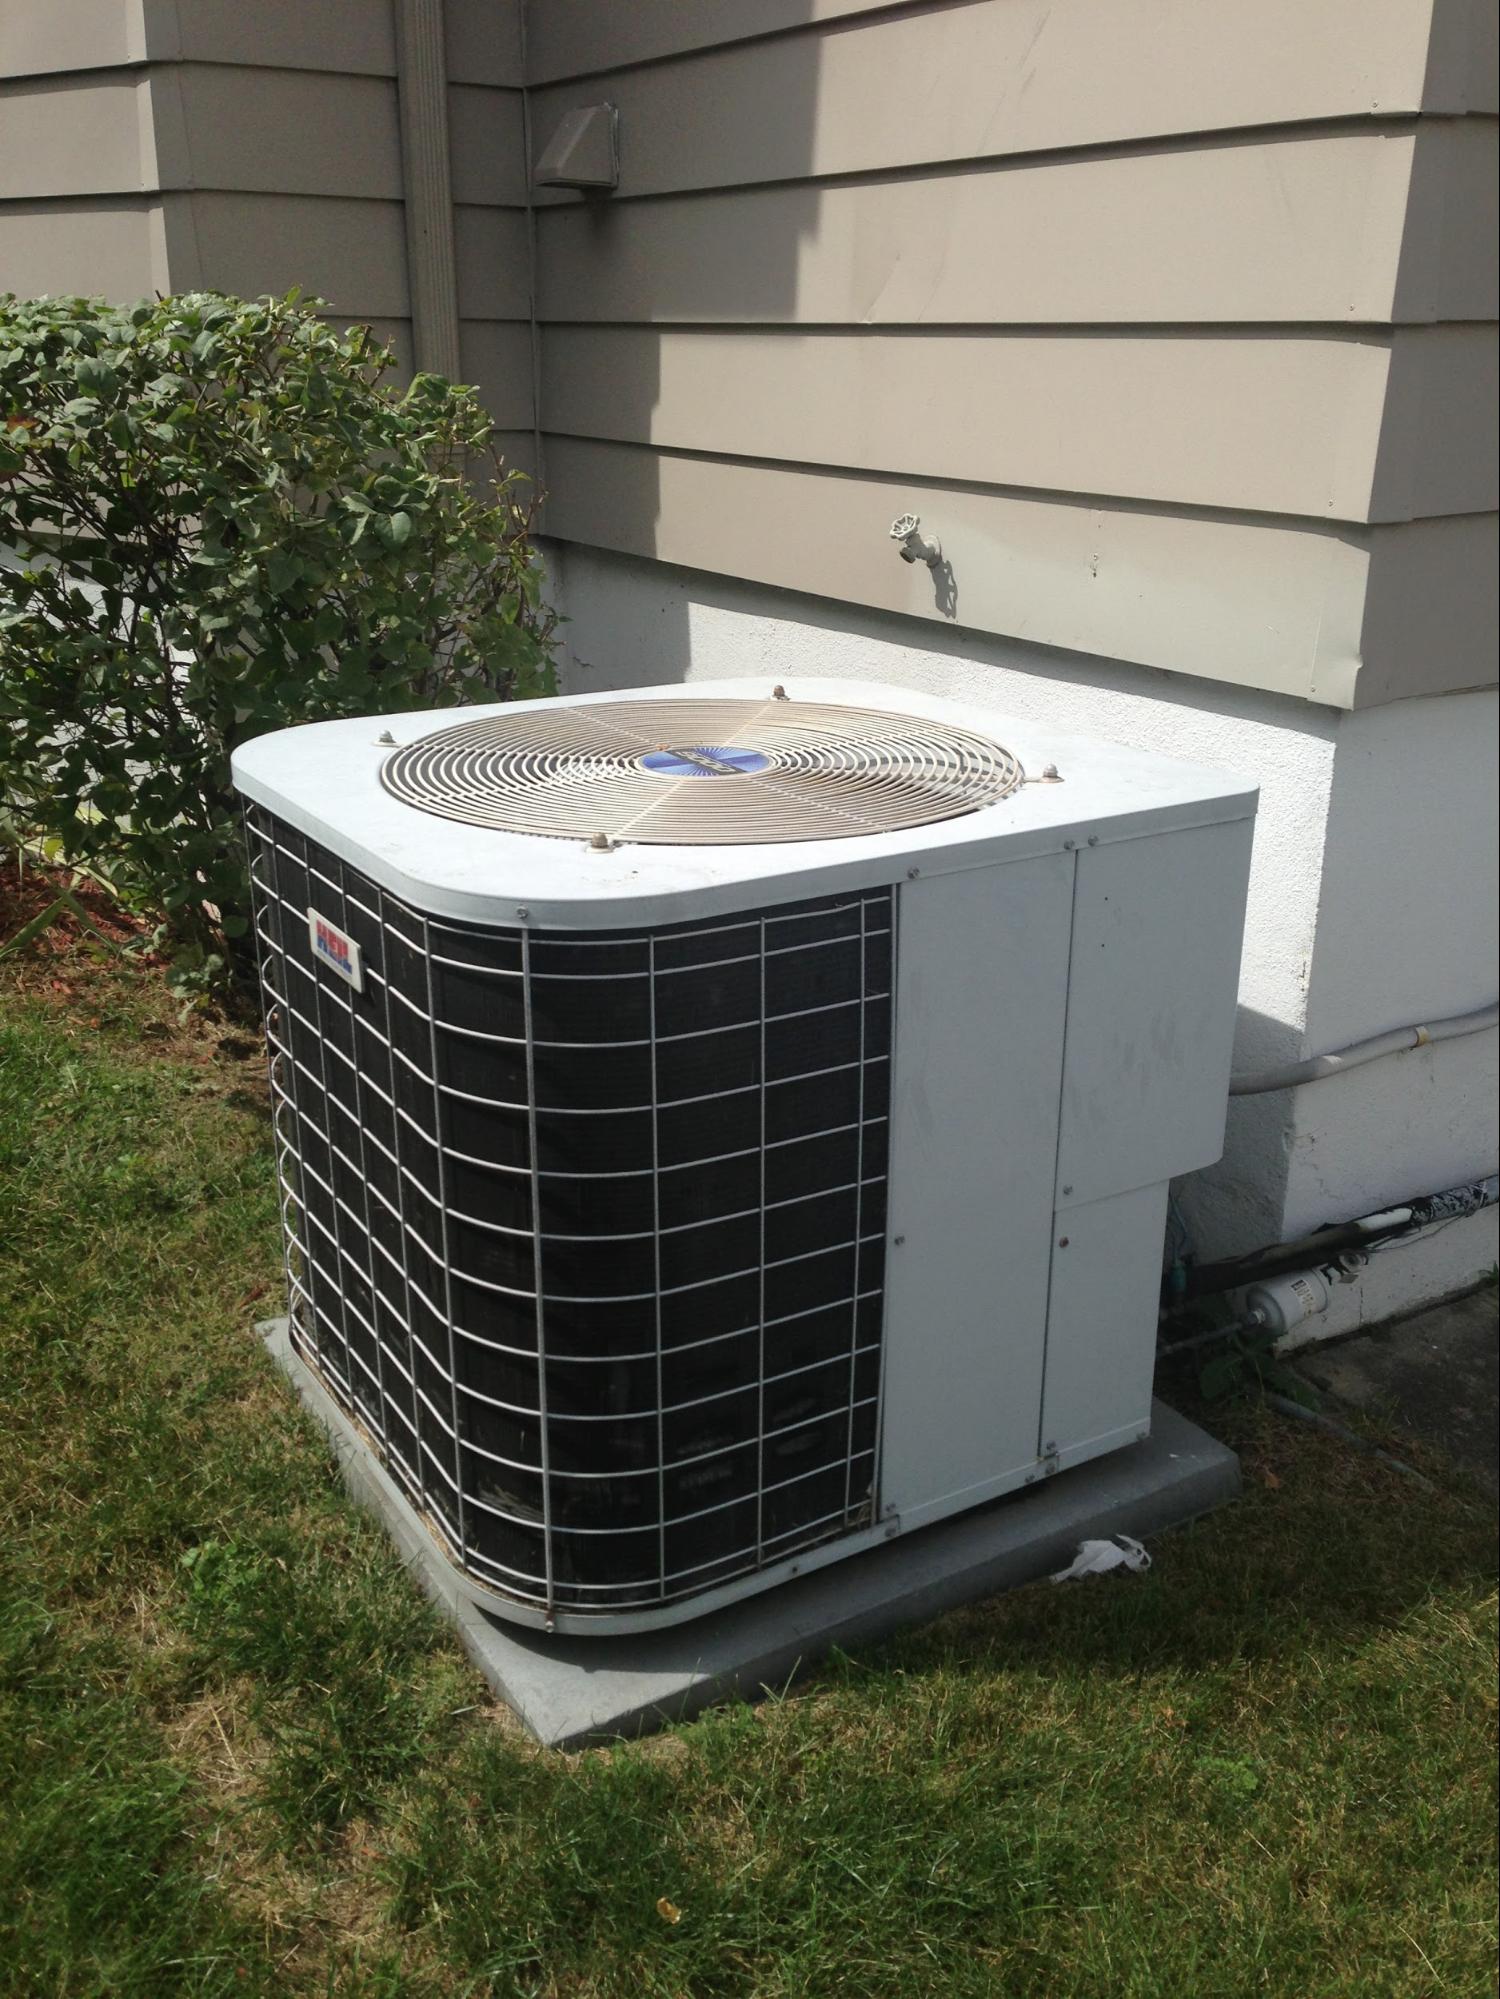 An outdoor condensing unit